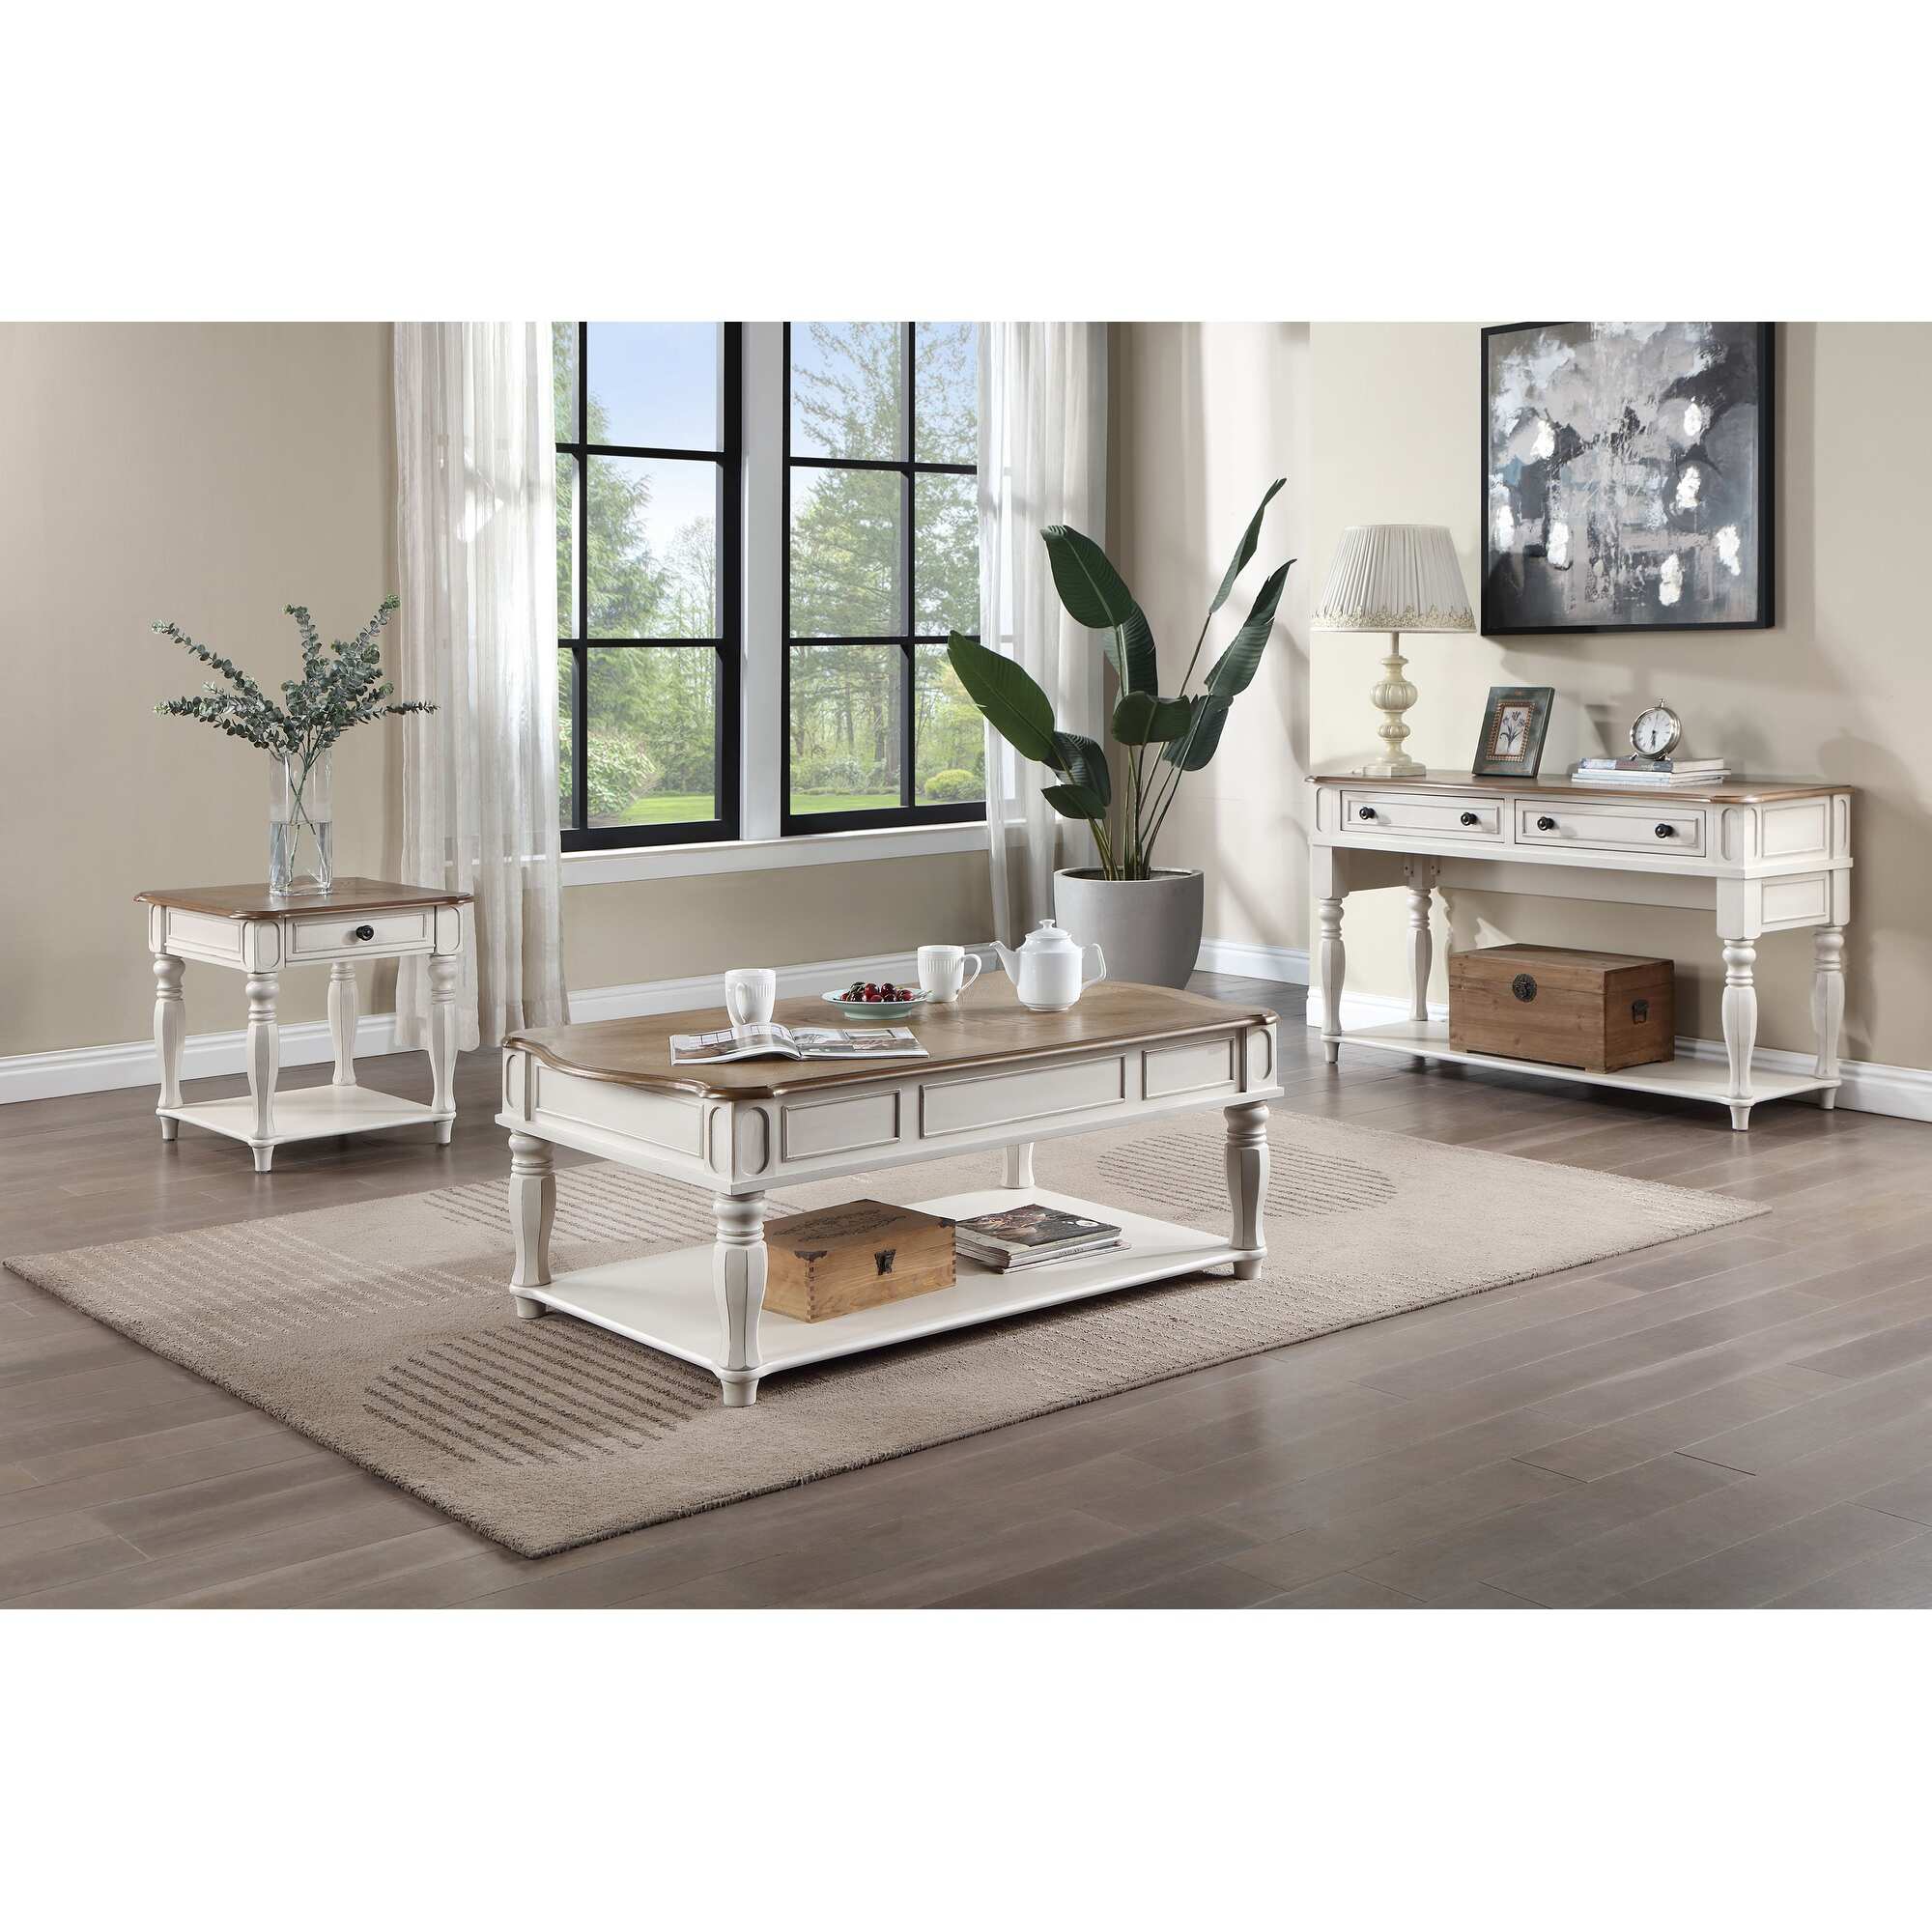 ACME Florian 2-drawer Sofa Table in Oak and Antique White